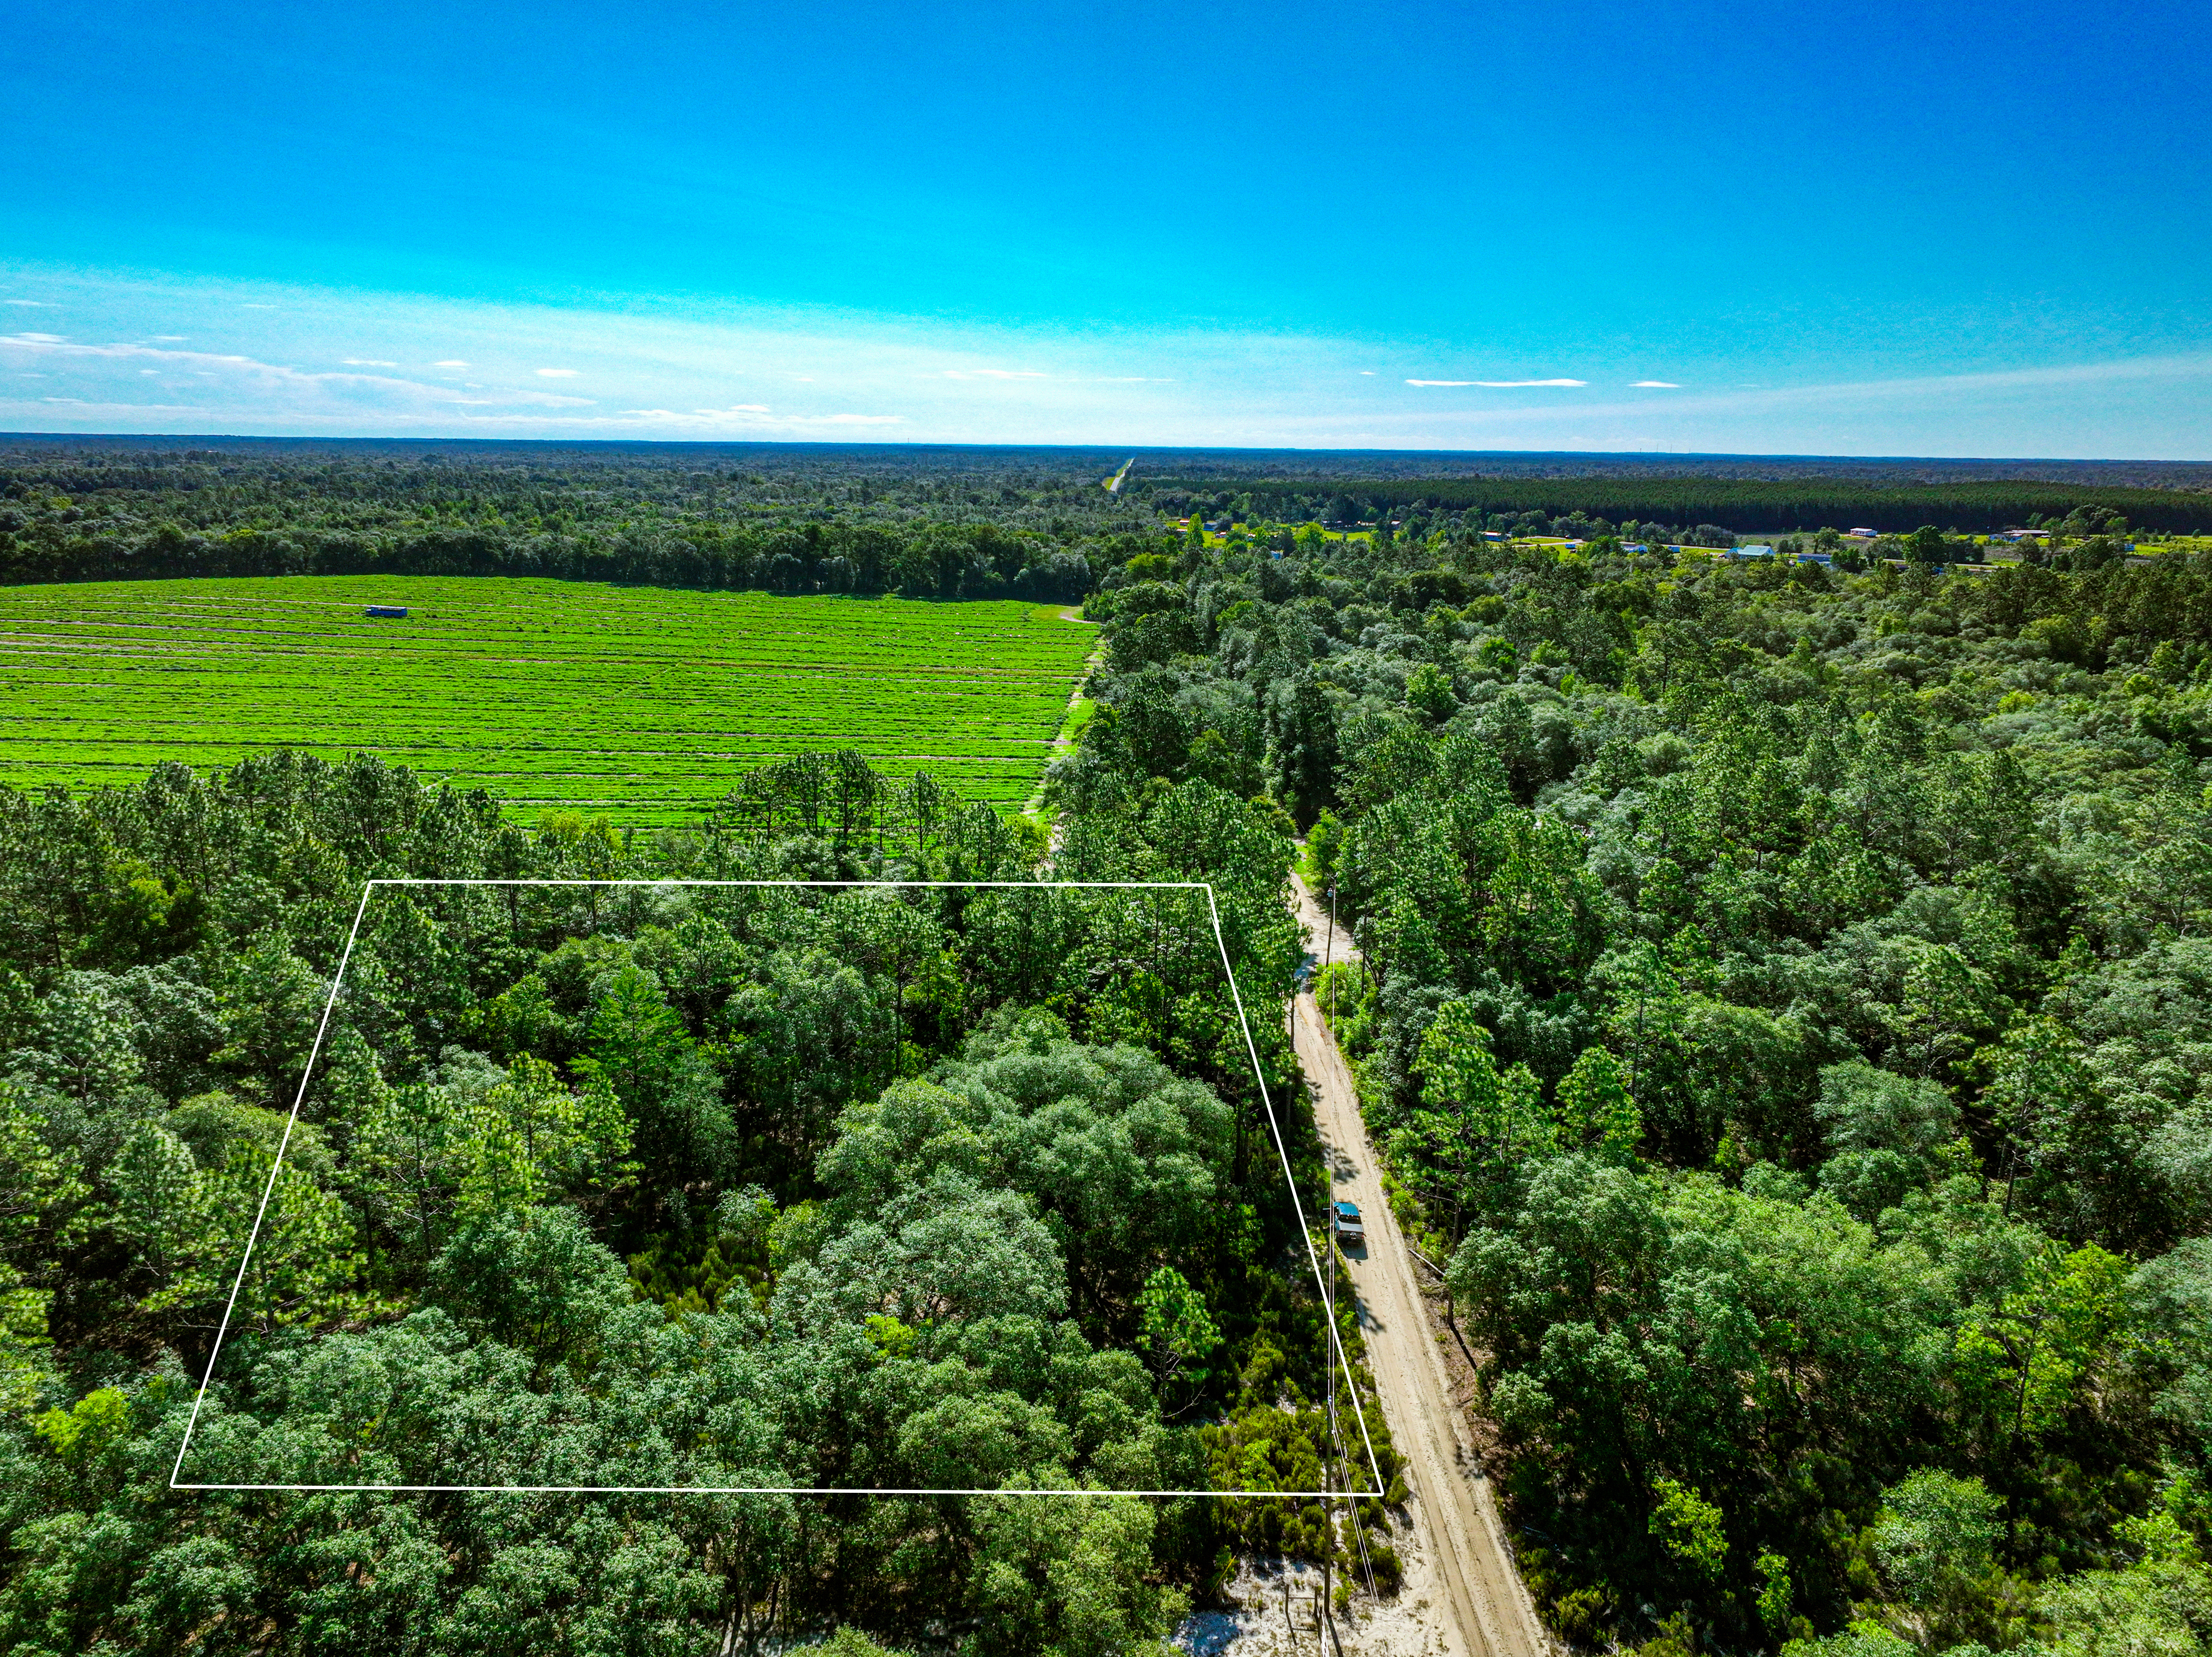 Pristine 2.5 Acre Lot in the Developing Levy County, FL